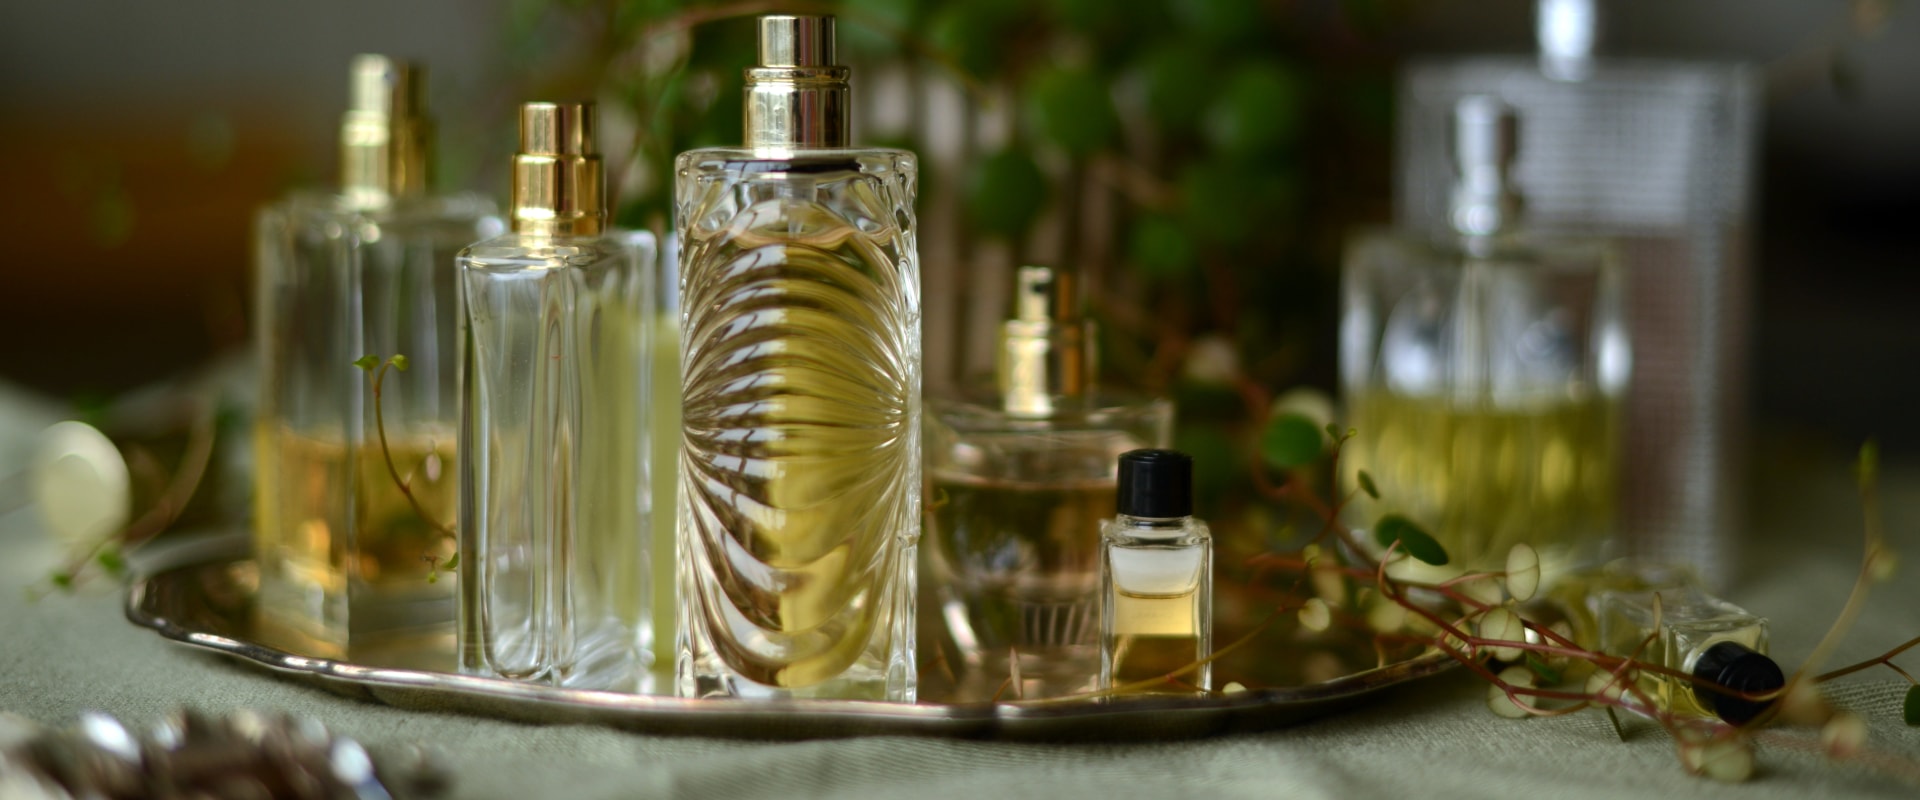 Tips for Accurately Testing Perfumes with Different Fragrances